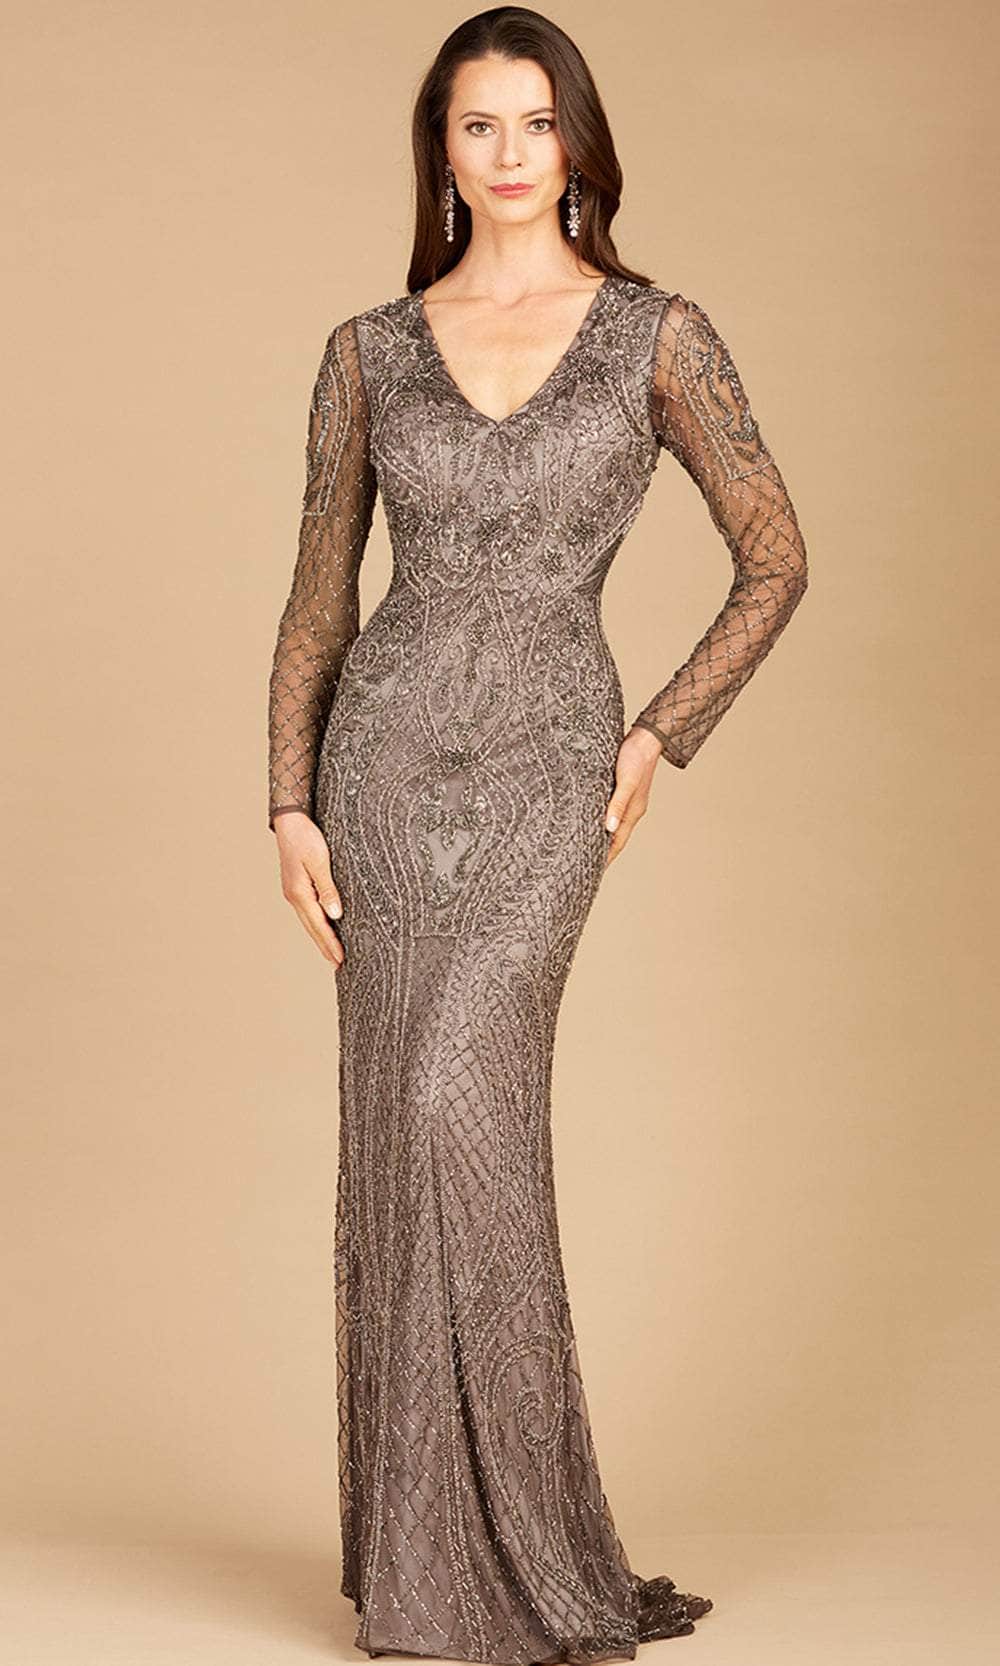 Lara Dresses 29615 - Long Sheer Sleeved Evening Gown Special Occasion Dress 4 / Grey